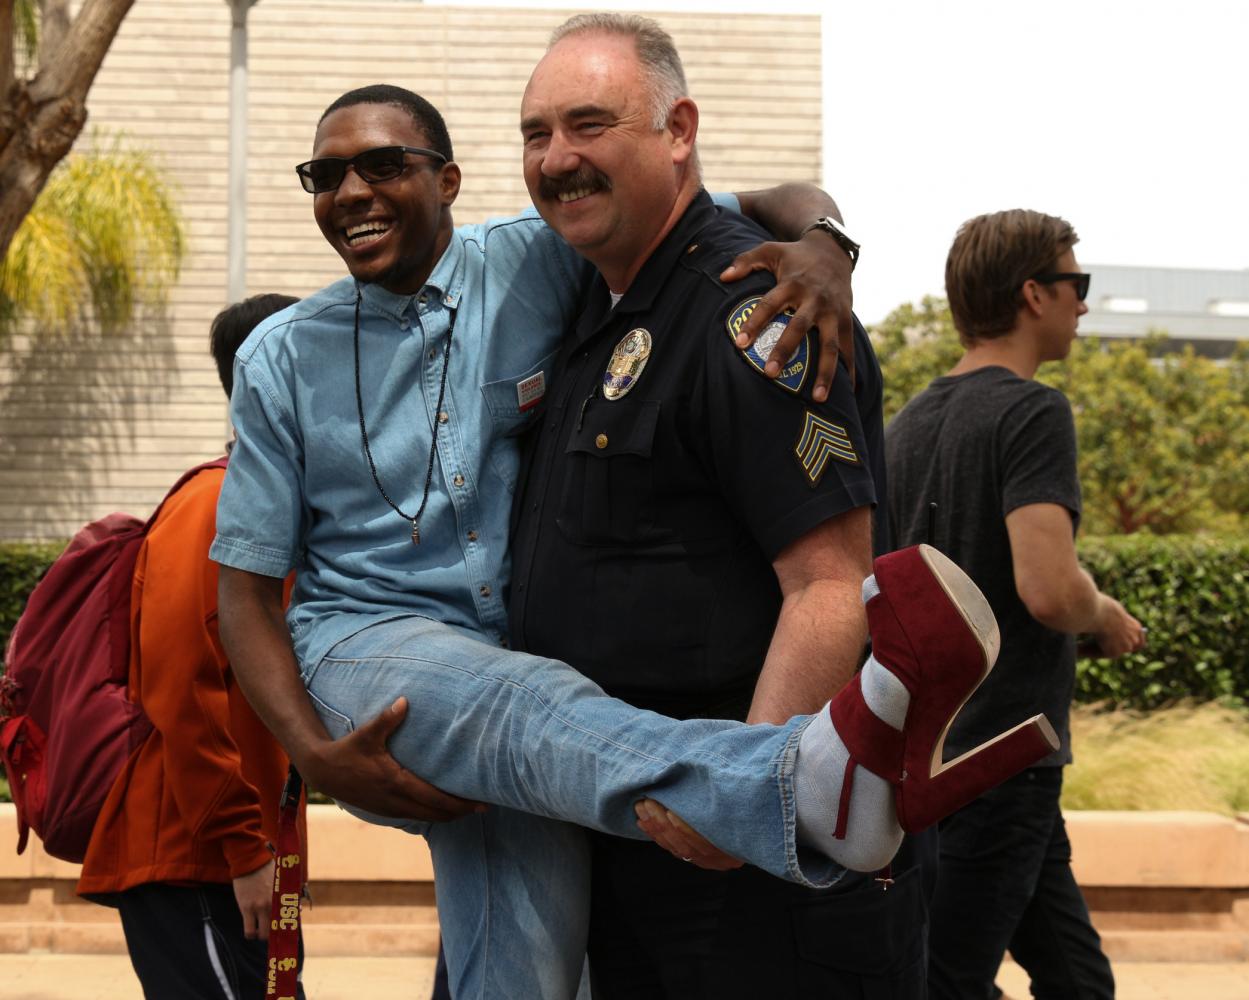  President Terrence Ware Jr. and Sgt. Romano pose for a picture during Consent week at Santa Monica College on April 26th, 2017. Jose Aguila. 